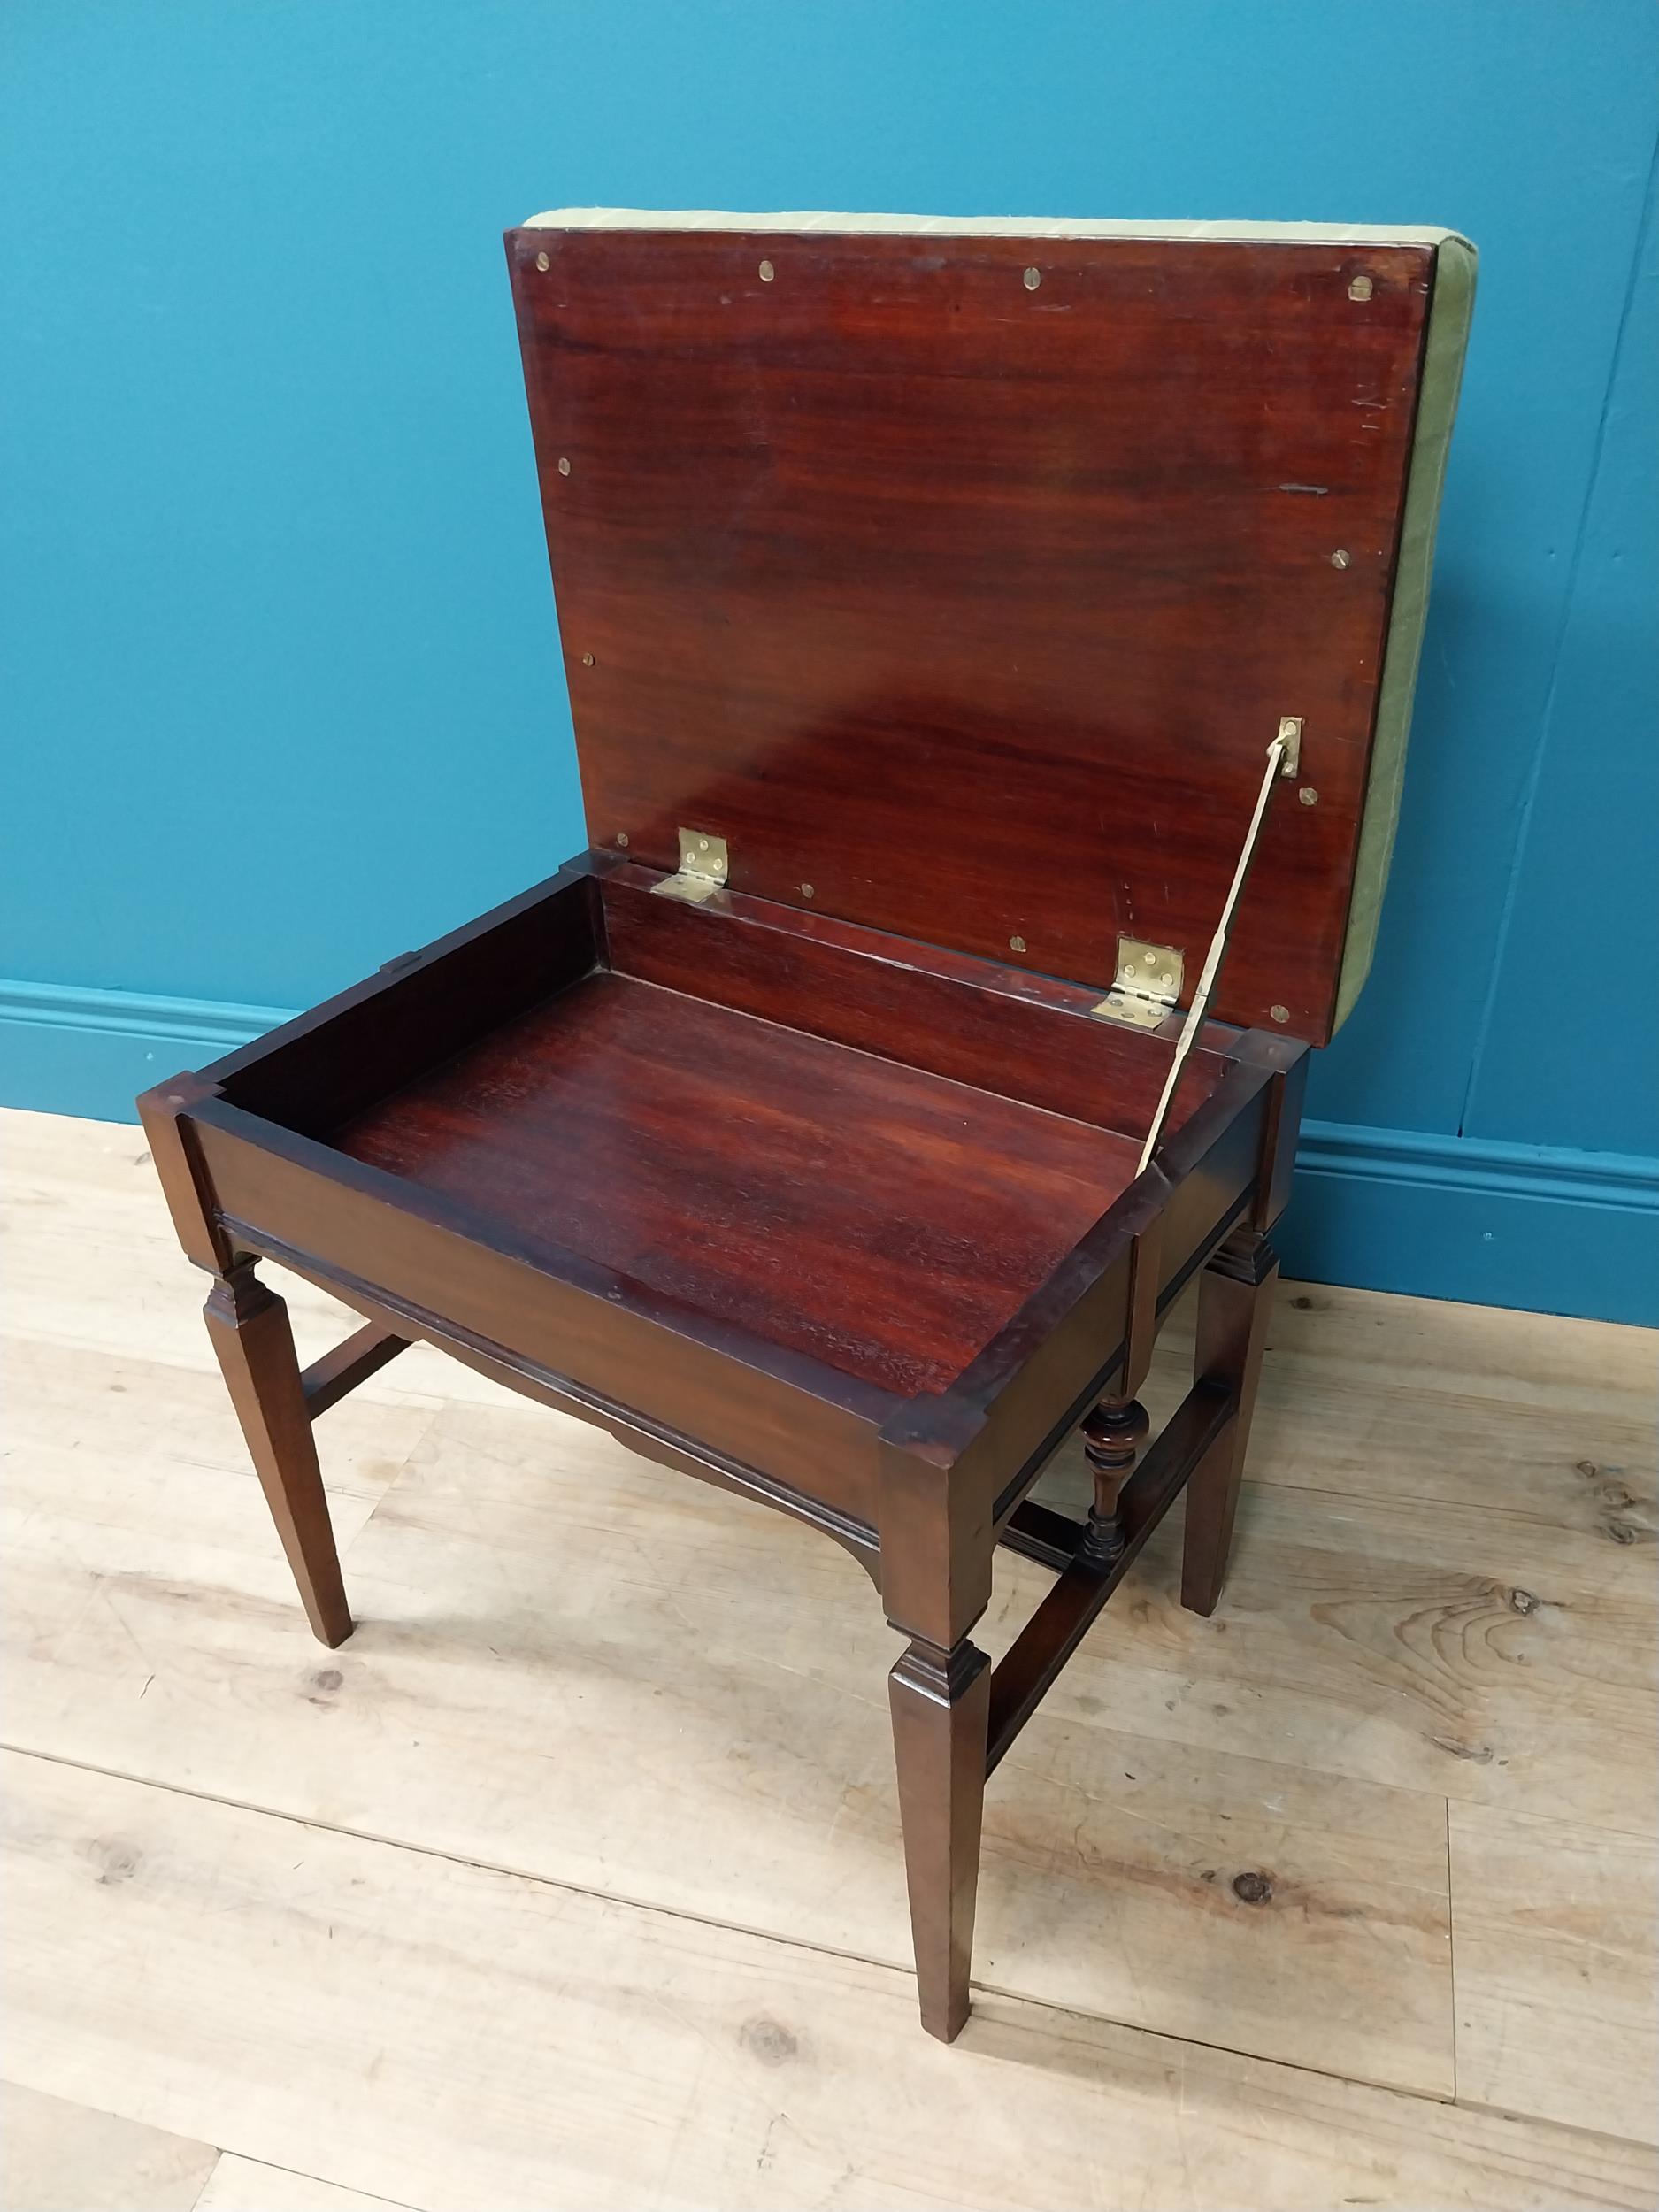 Good quality Edwardian mahogany piano stool with upholstered seat and lift up seat raised on - Image 2 of 3